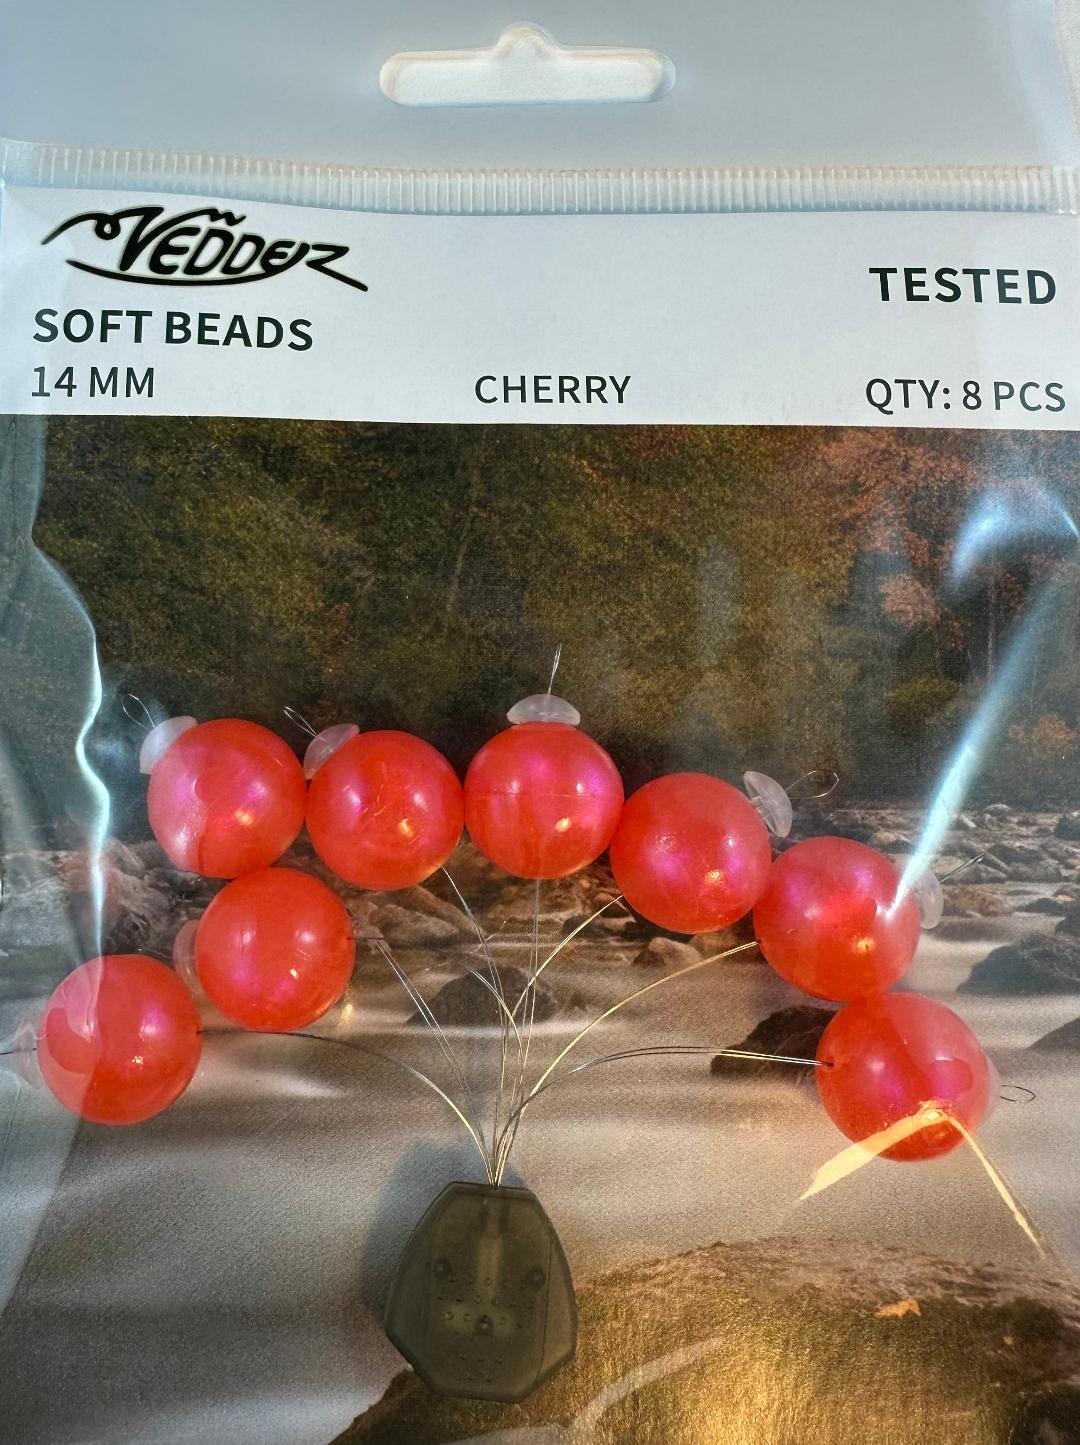 VSB-Cherry 14 Vedder 14 mm Cherry Soft Beads x 8 with Stoppers x 8